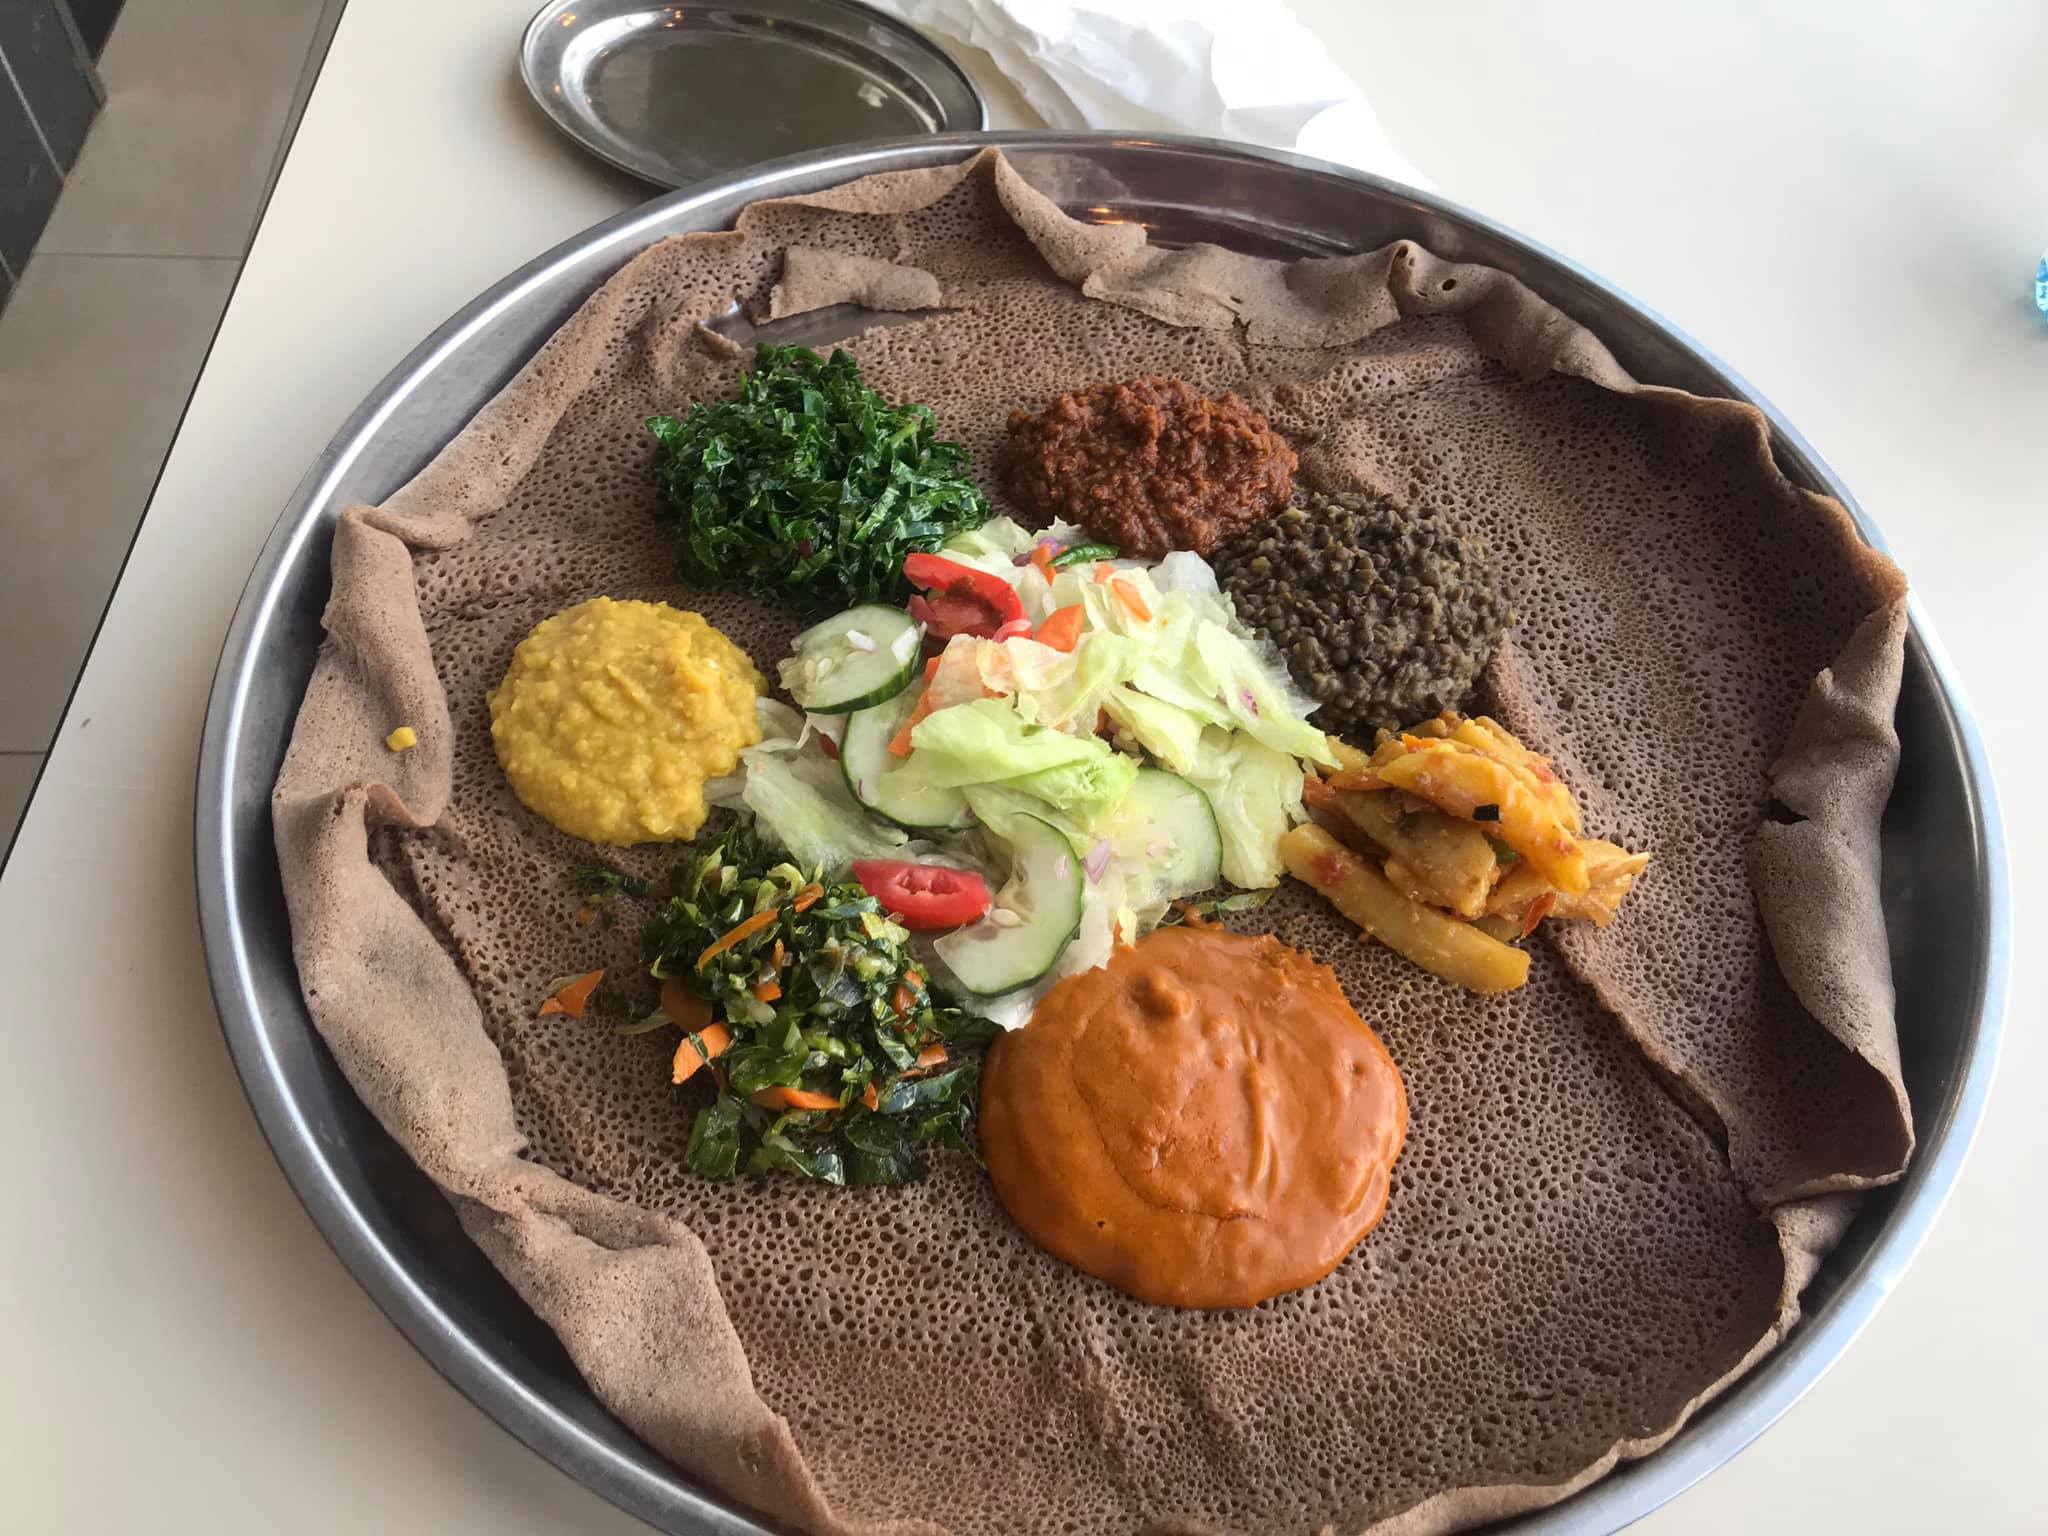  You have to eat Ethiopian in Kenya, I mean they are neighbors. This was the vegetarian platter at a fast food Ethiopia spot at the Prestige Plaza mall called simply, “Ethiopian Dishes”. 